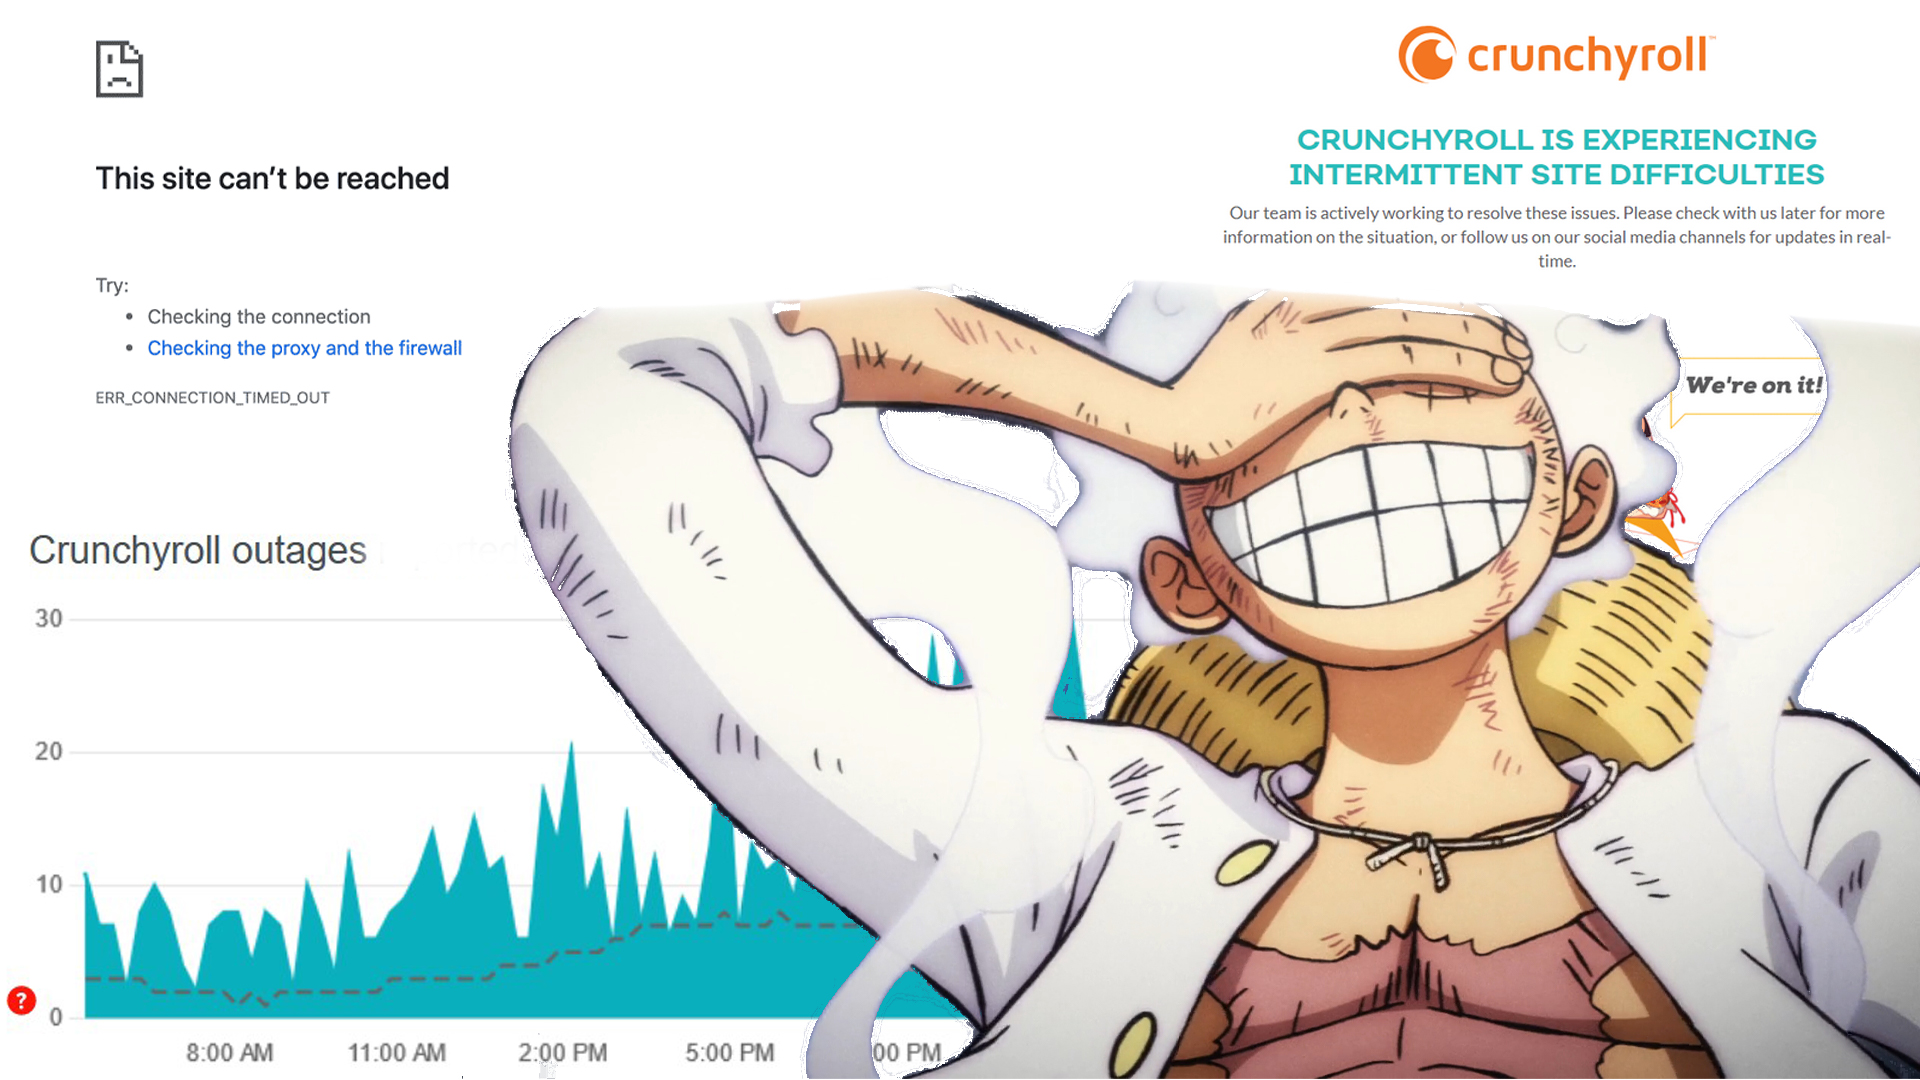 One Piece episode 1071 crashes Crunchyroll's servers following the